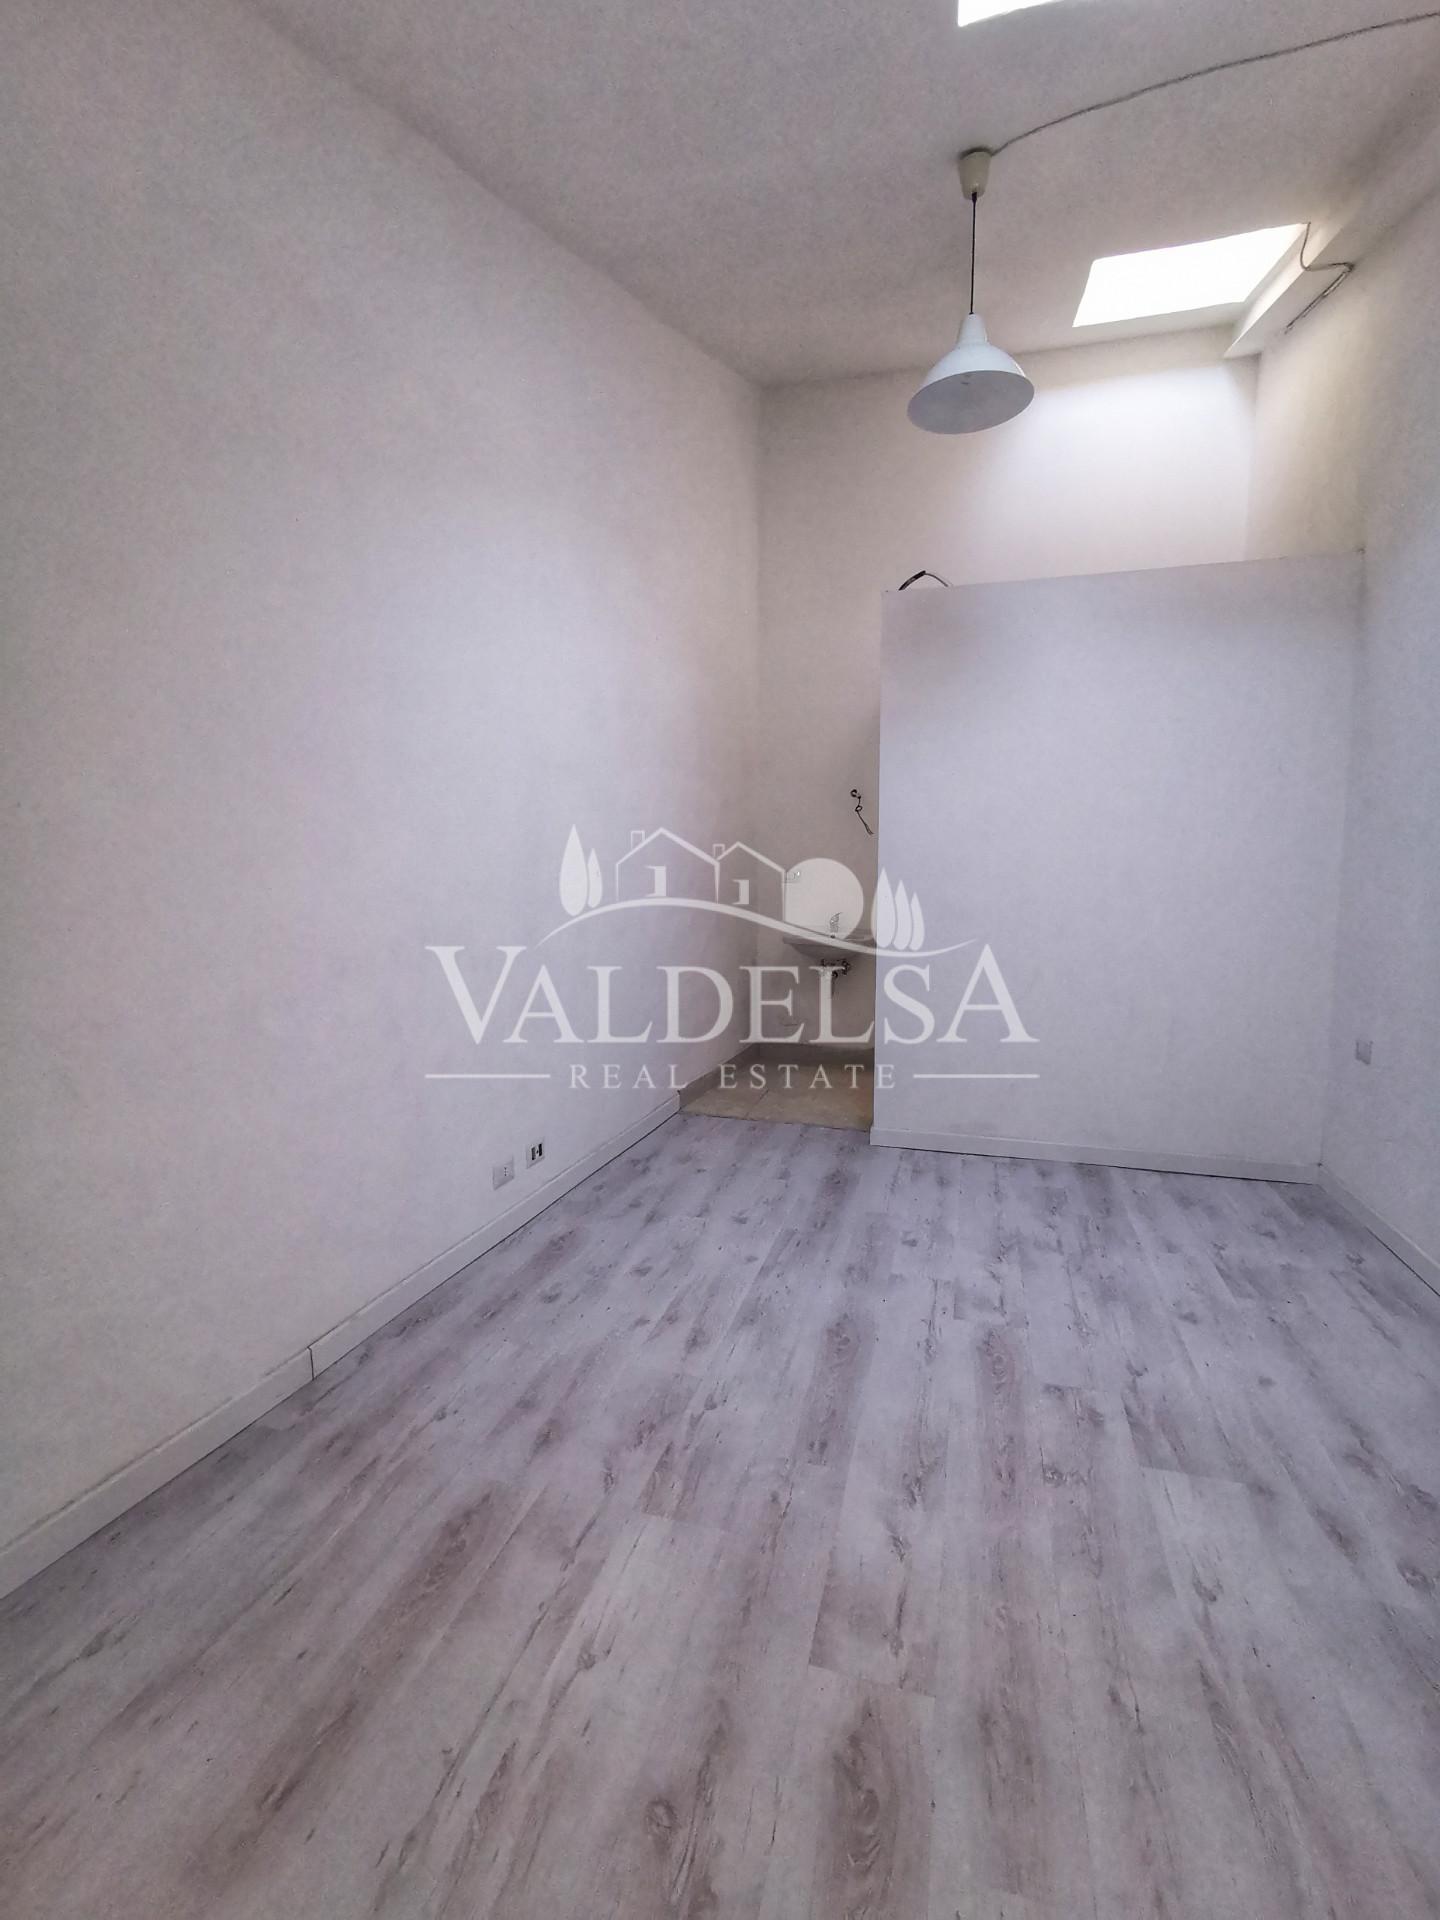 Apartment for sale, ref. 679